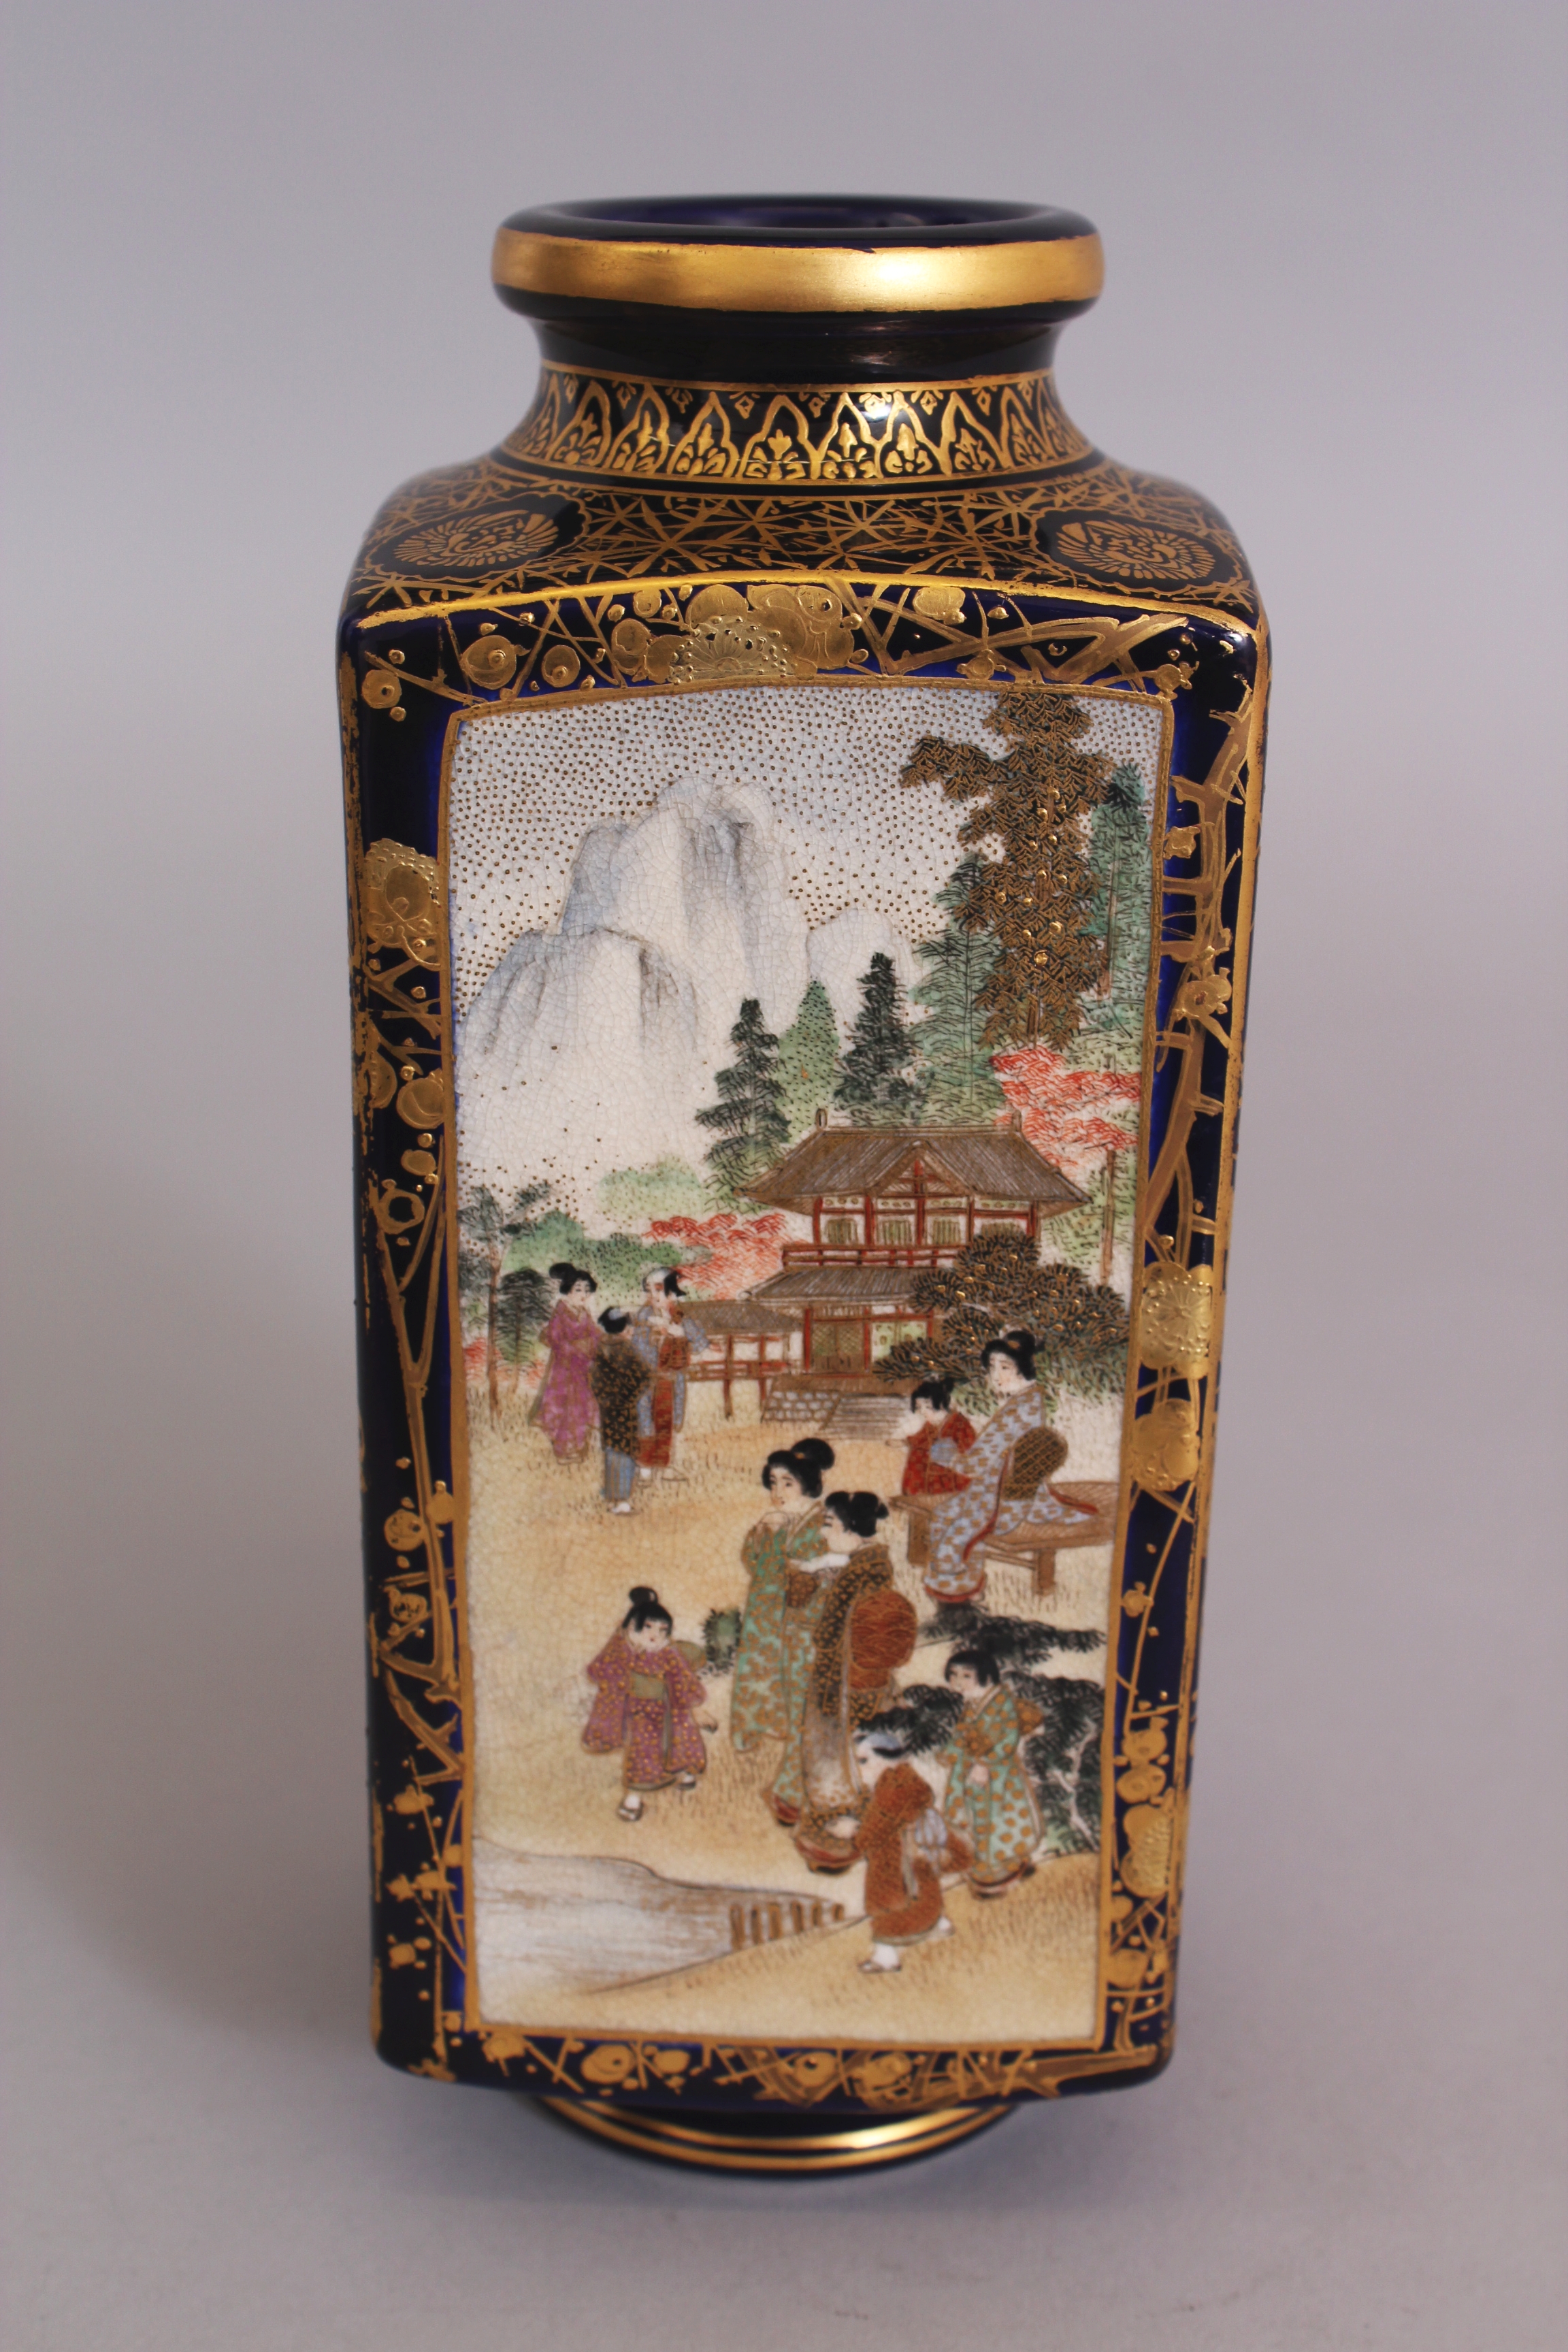 A GOOD QUALITY SIGNED JAPANESE MEIJI PERIOD SATSUMA SQUARE SECTION EARTHENWARE VASE, well painted - Image 3 of 10